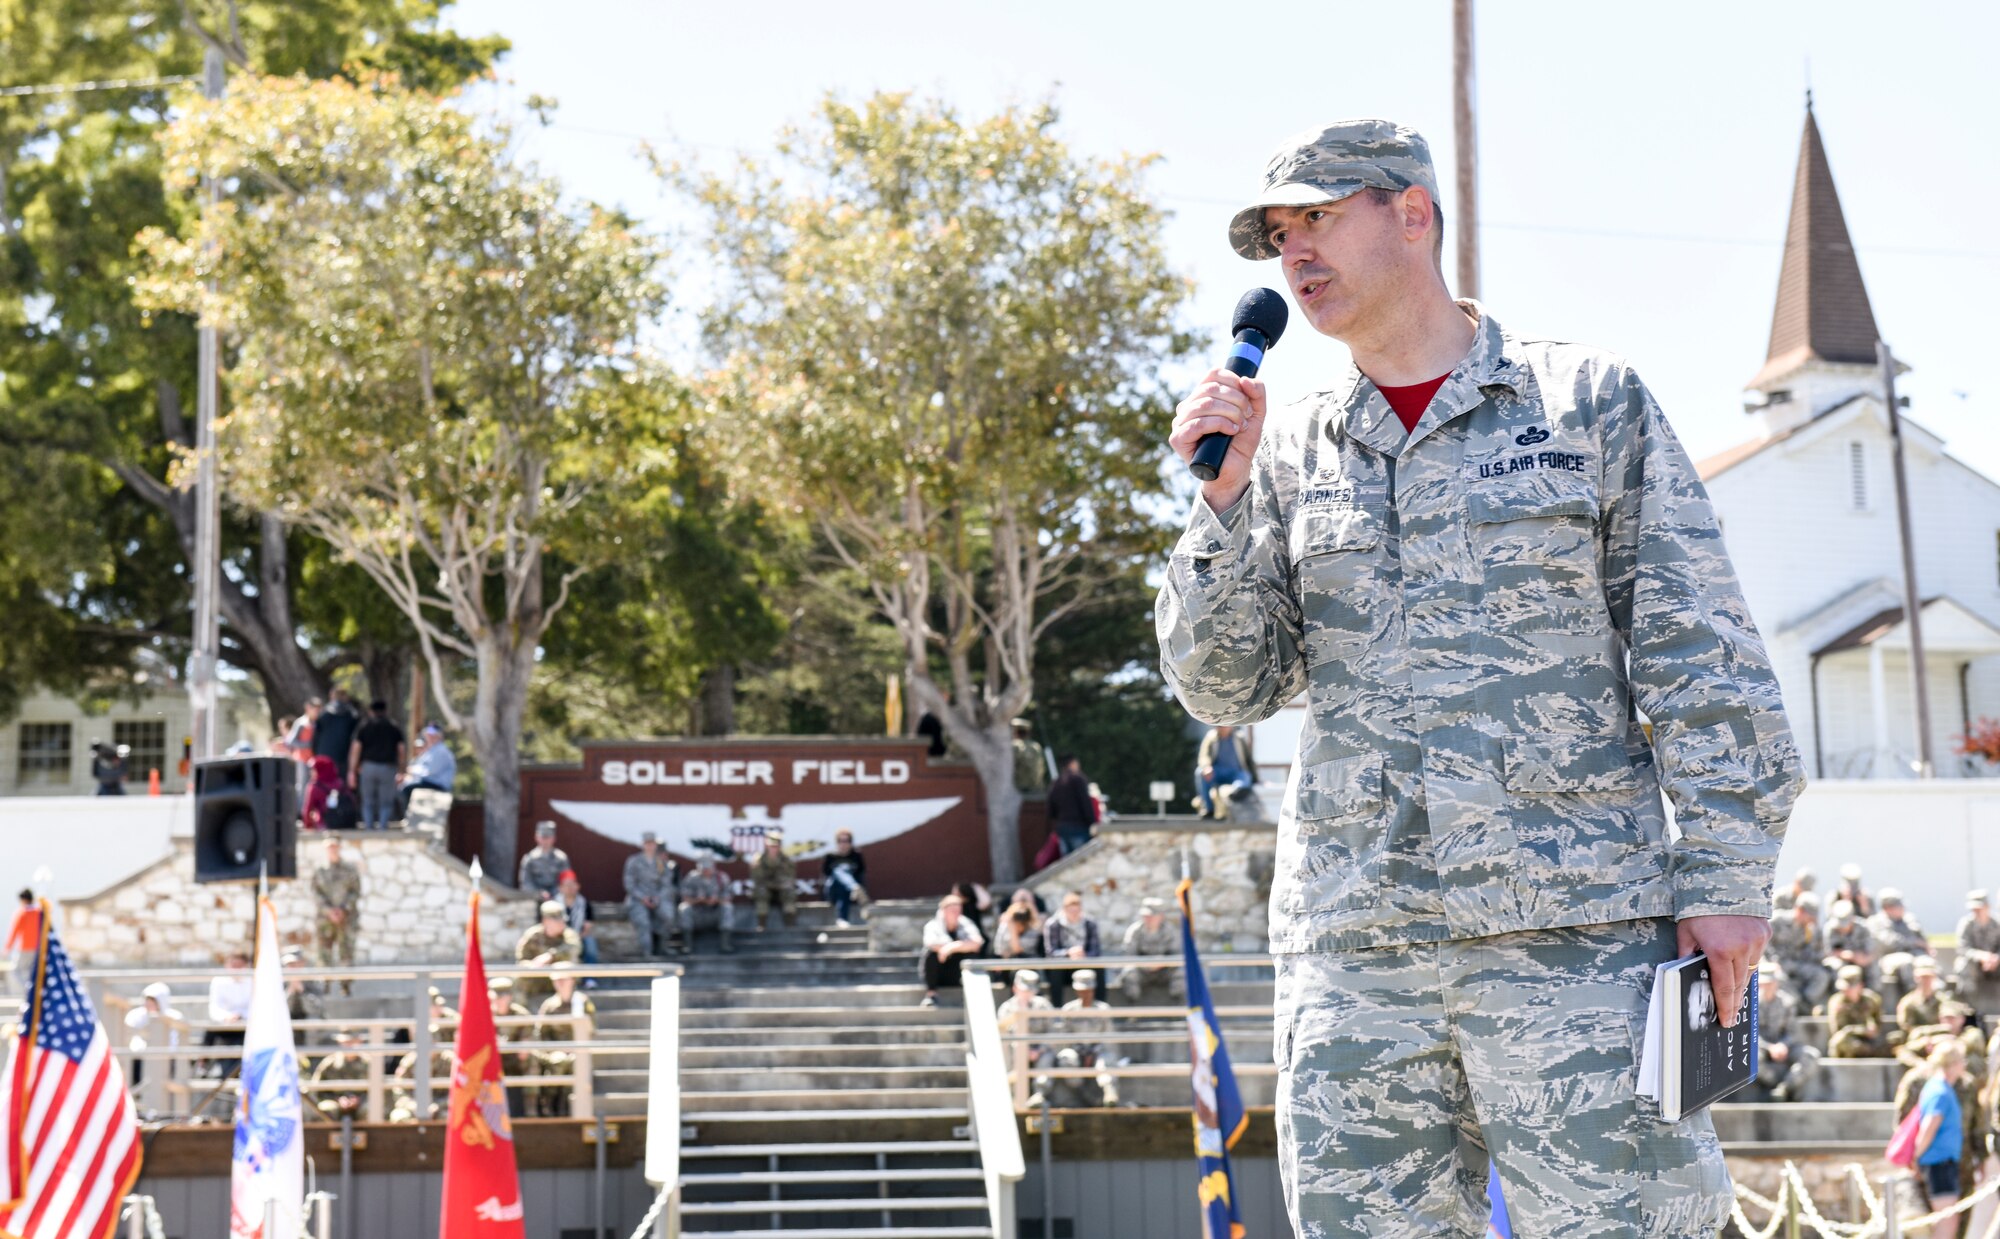 U.S. Air Force Col. Wiley Barnes, 517th Training Group commander, provides closing remarks for the Defense Language Institute Foreign Language Center at the Presideo of Monterey, California, May 11, 2018. Language Day is the one day the general public can visit the Presideo of Monterey and learn about the mission and work done by DLIFLC.